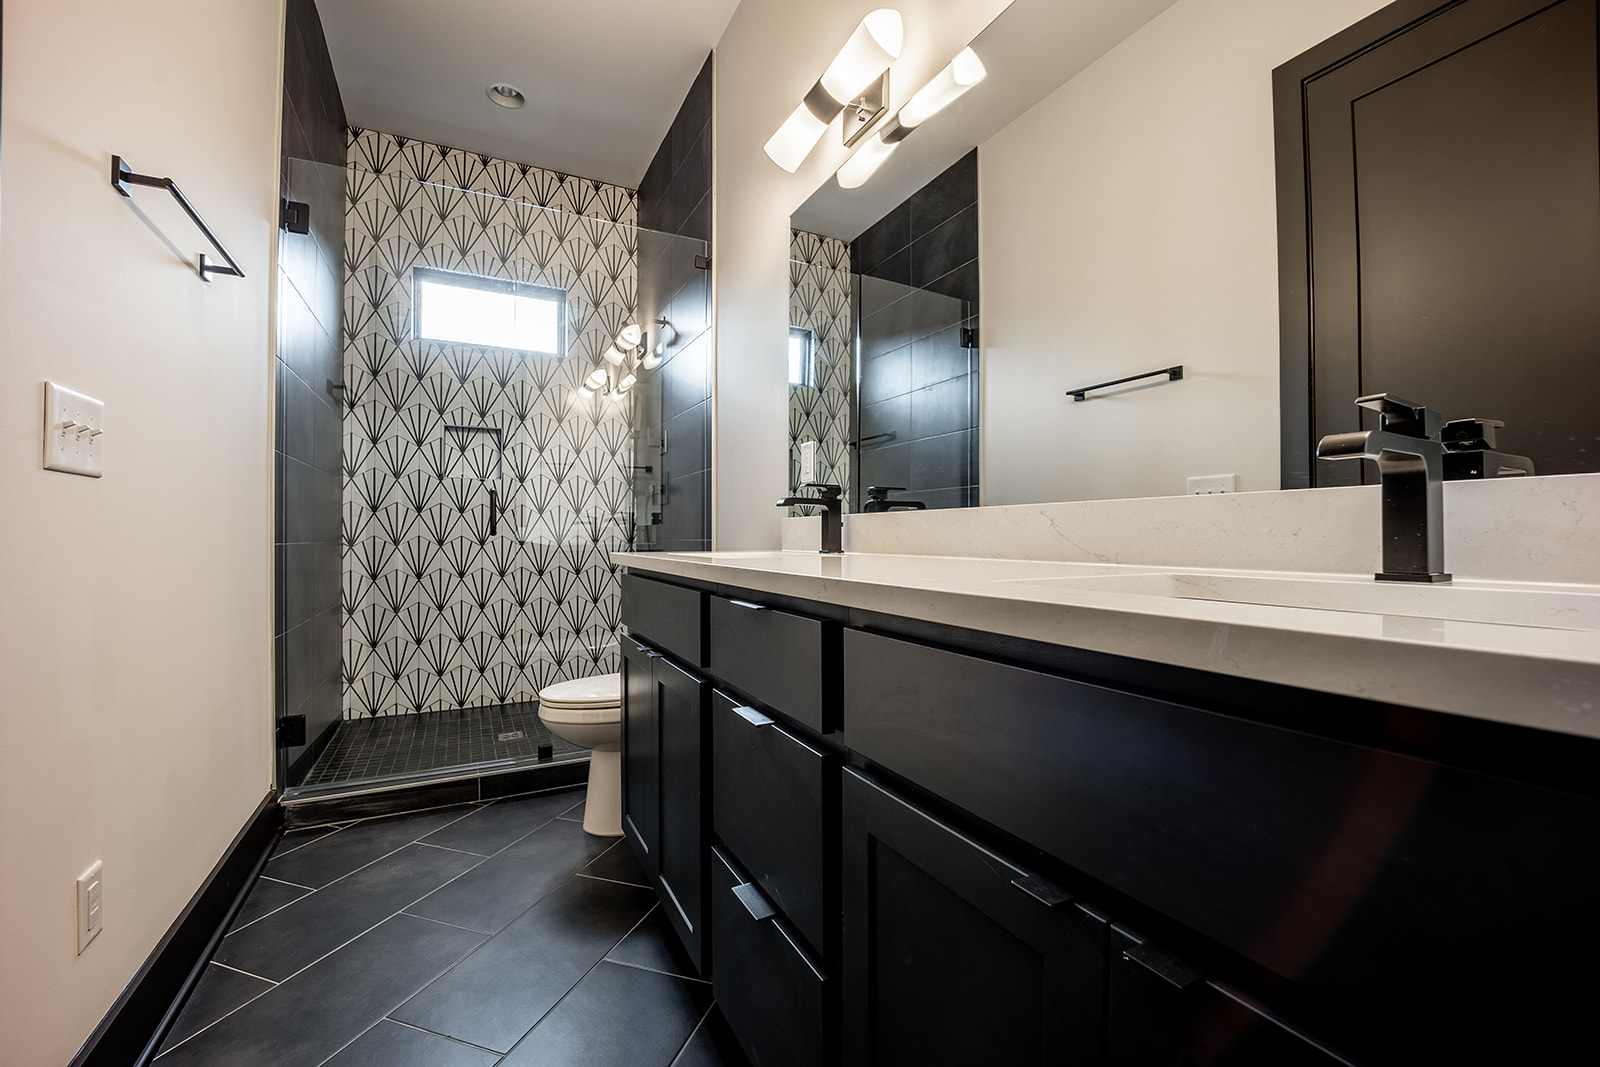 Unit 3: Master bathroom with dual vanity and walk in shower.